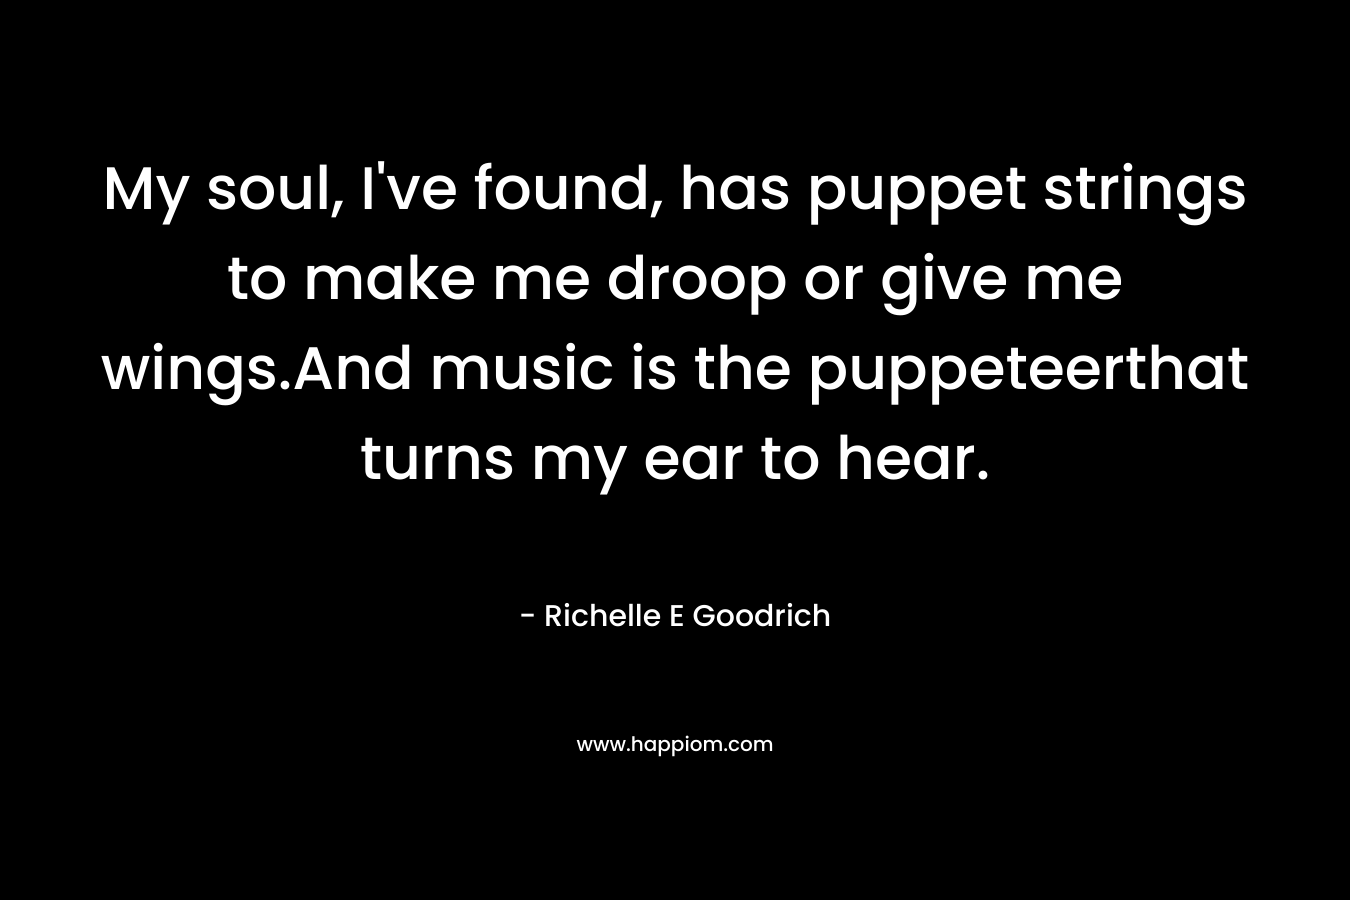 My soul, I've found, has puppet strings to make me droop or give me wings.And music is the puppeteerthat turns my ear to hear.